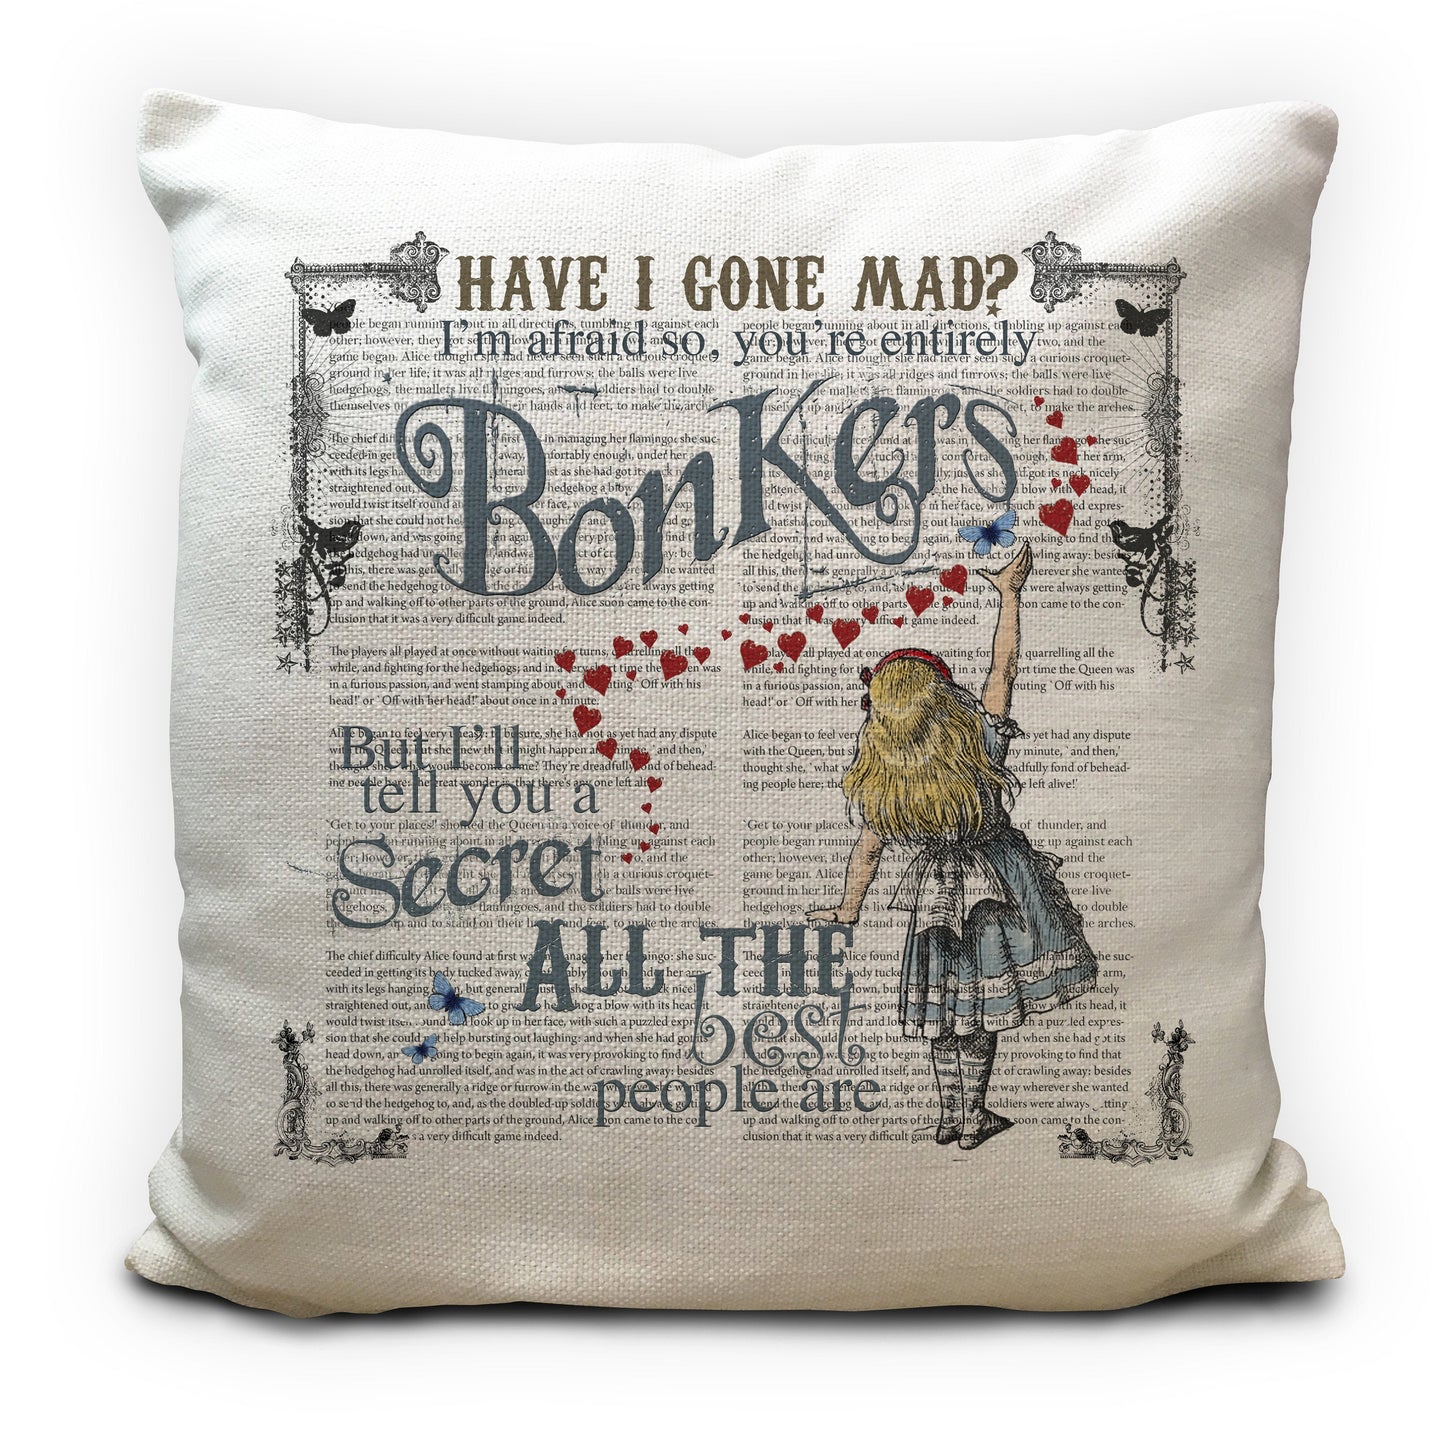 Alice in wonderland cushion cover with bonkers quote